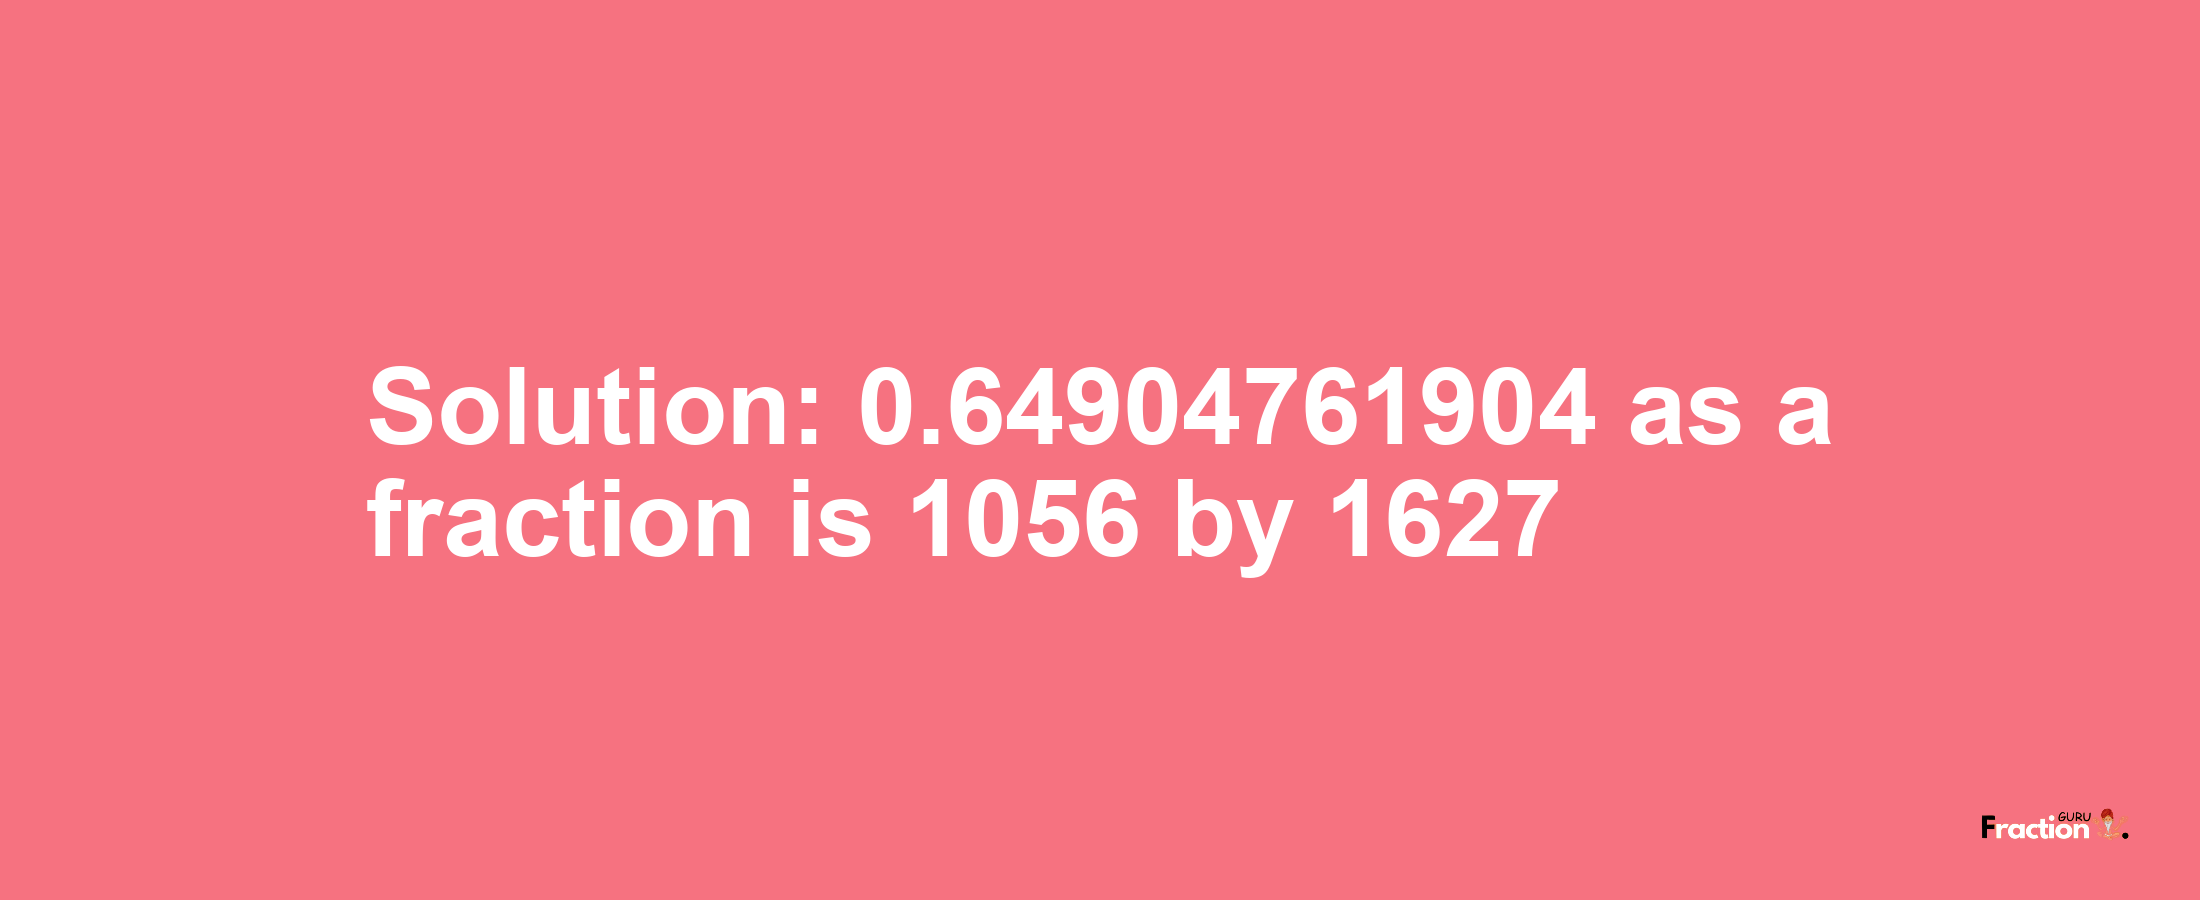 Solution:0.64904761904 as a fraction is 1056/1627